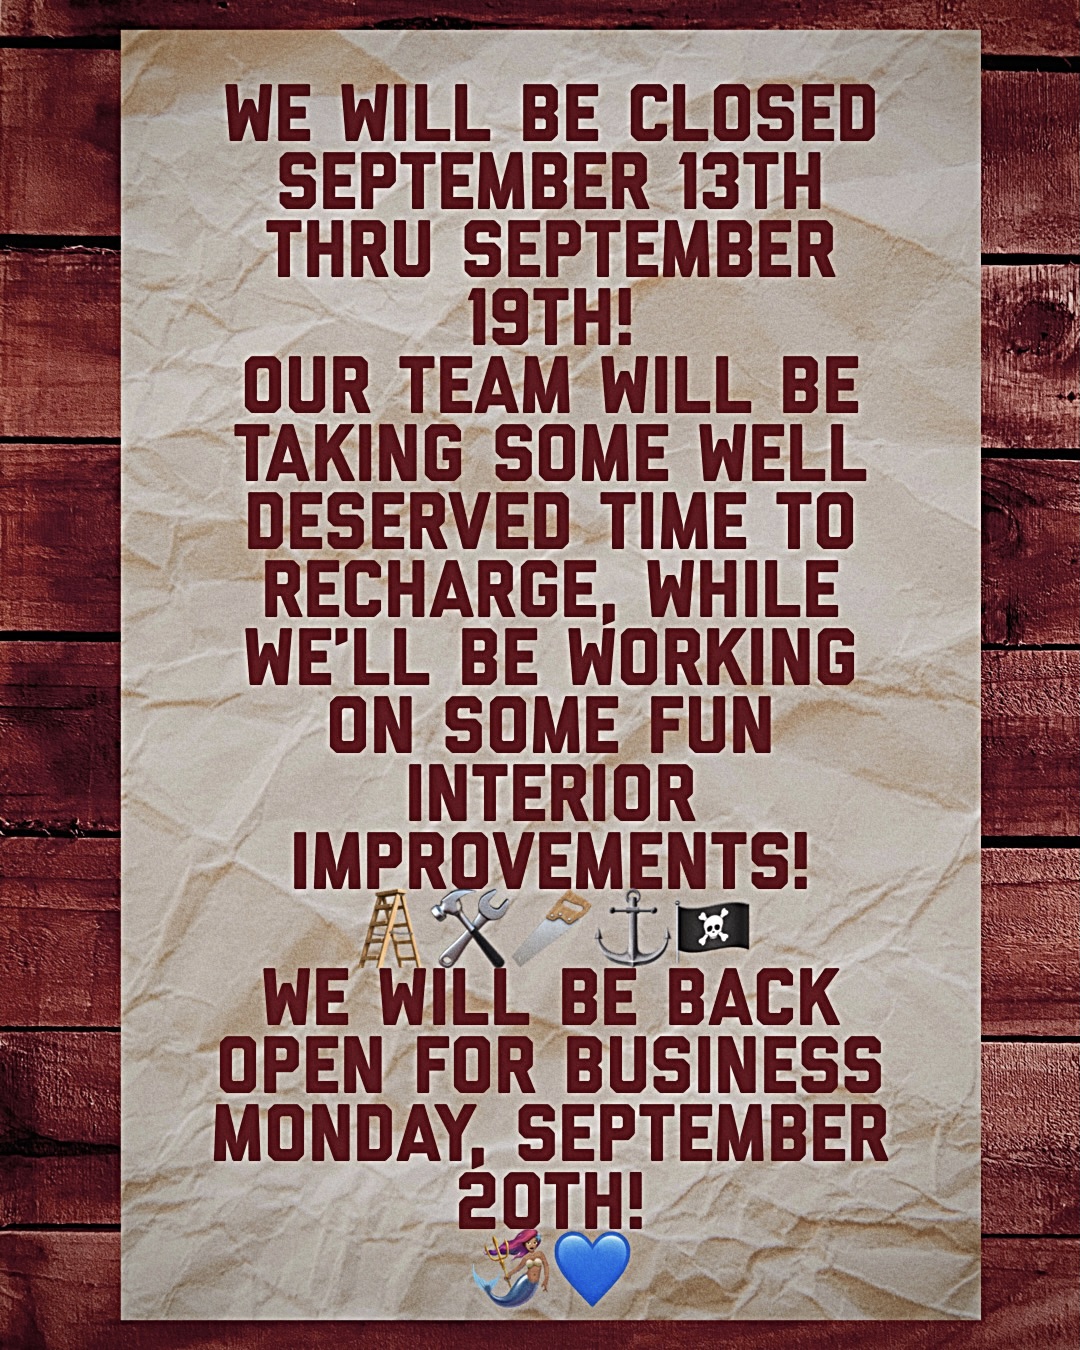 We will be close from September 13th -19th for Interior Improvements